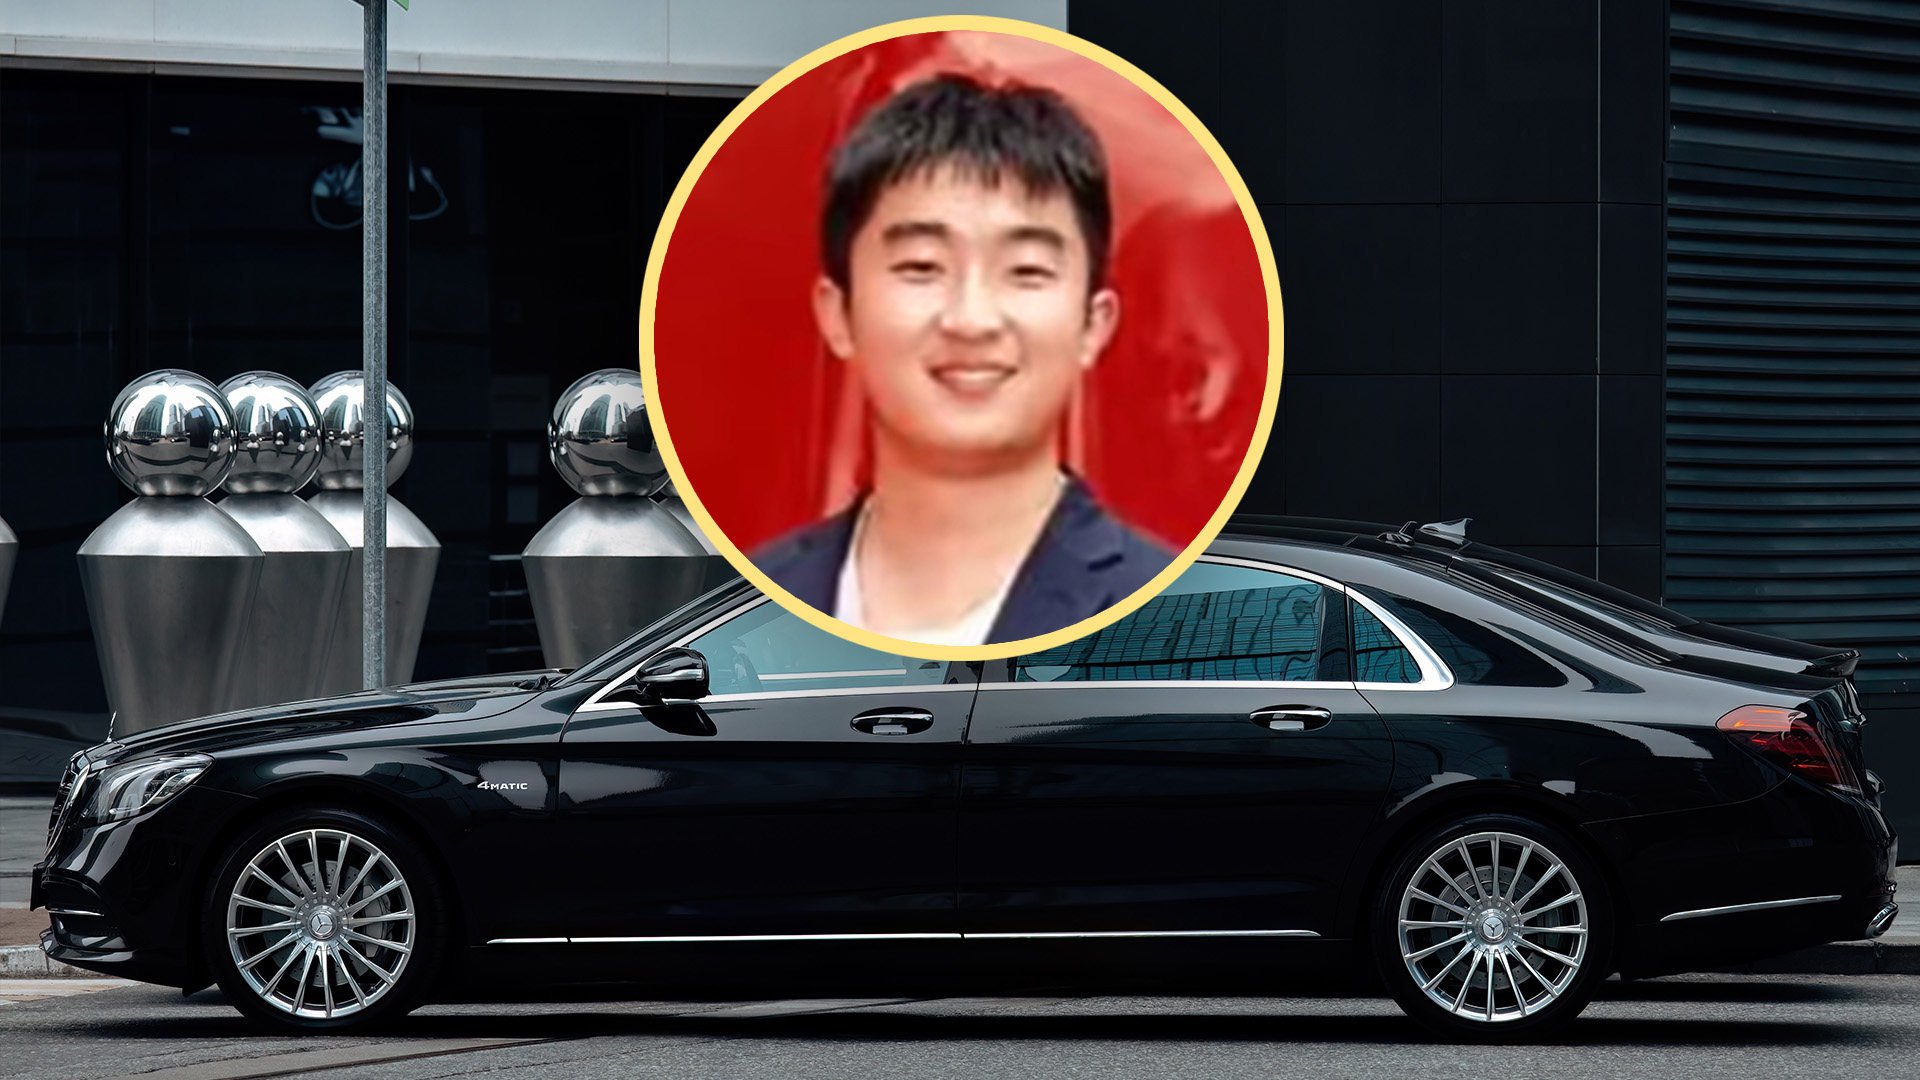 A teenager in China who was ridiculed as a “rich boy” after turning up for a key exam in a luxury car has confounded his critics by gaining top marks. Photo: SCMP composite/Shutterstock/Douyin